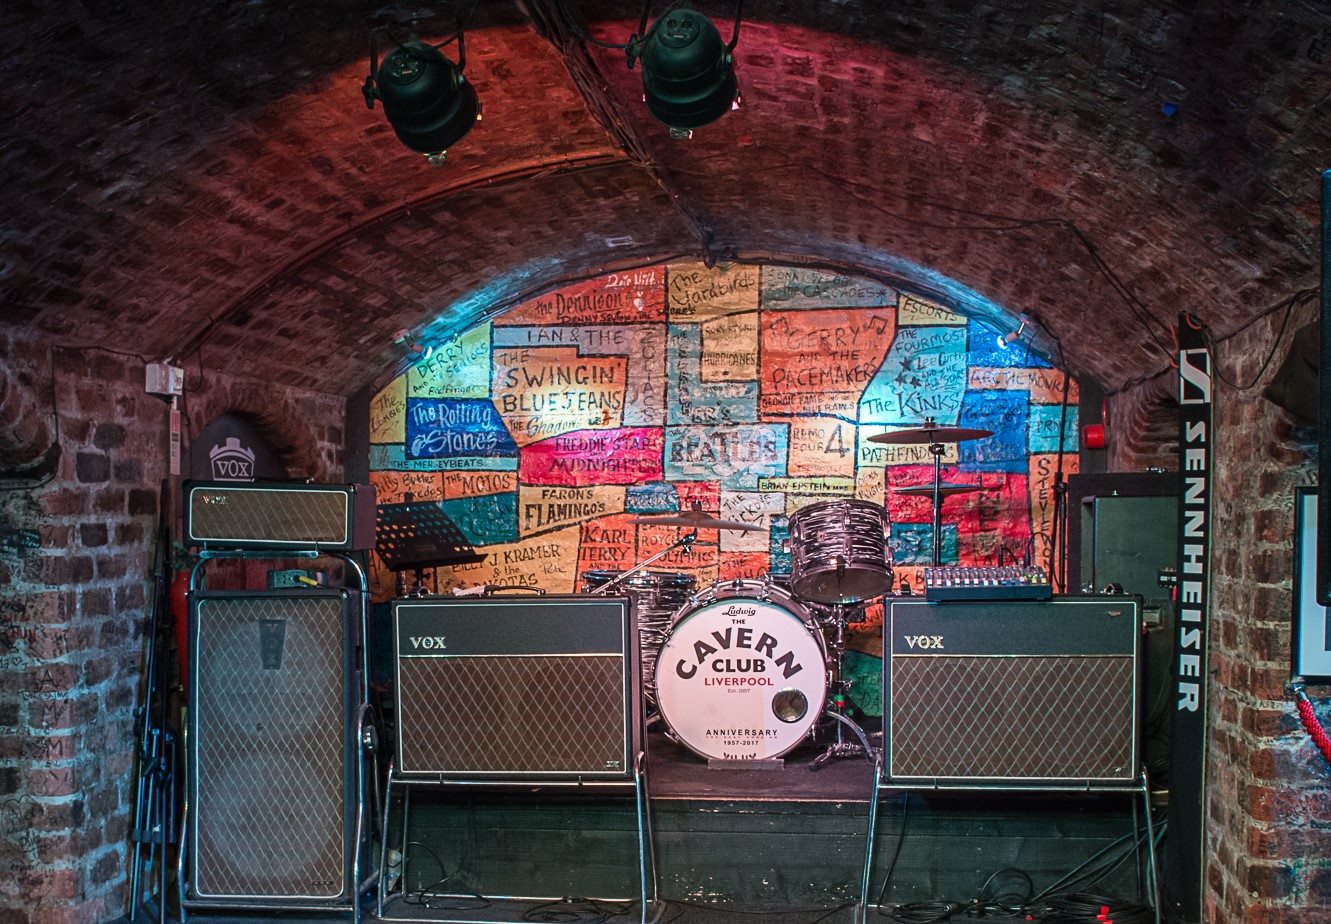 Inside Liverpool's famous Cavern Club.  A drum kit and autograph wall.